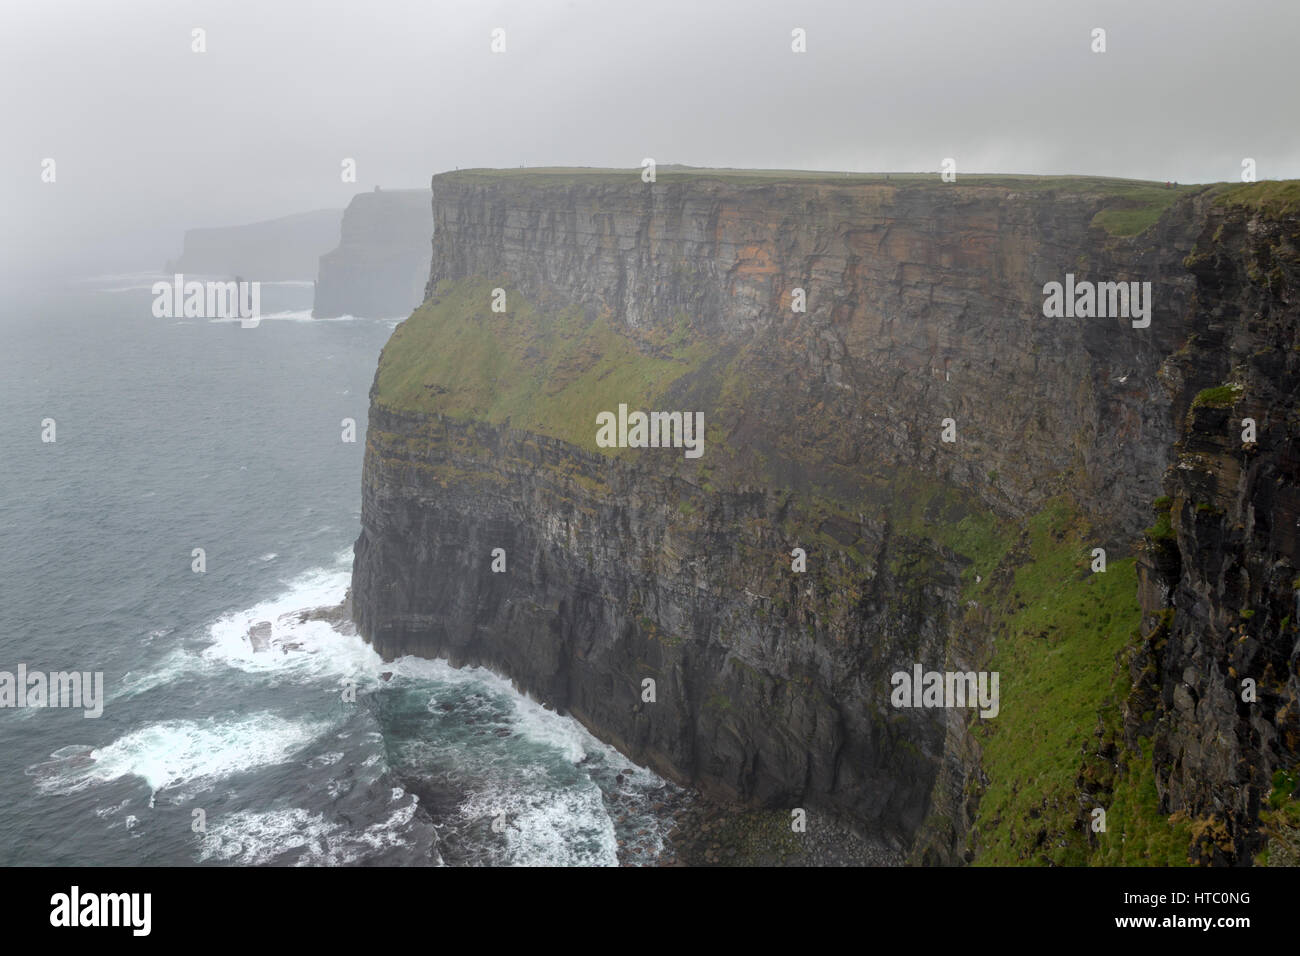 Cliffs of Moher, County Clare, Ireland, Europe Stock Photo